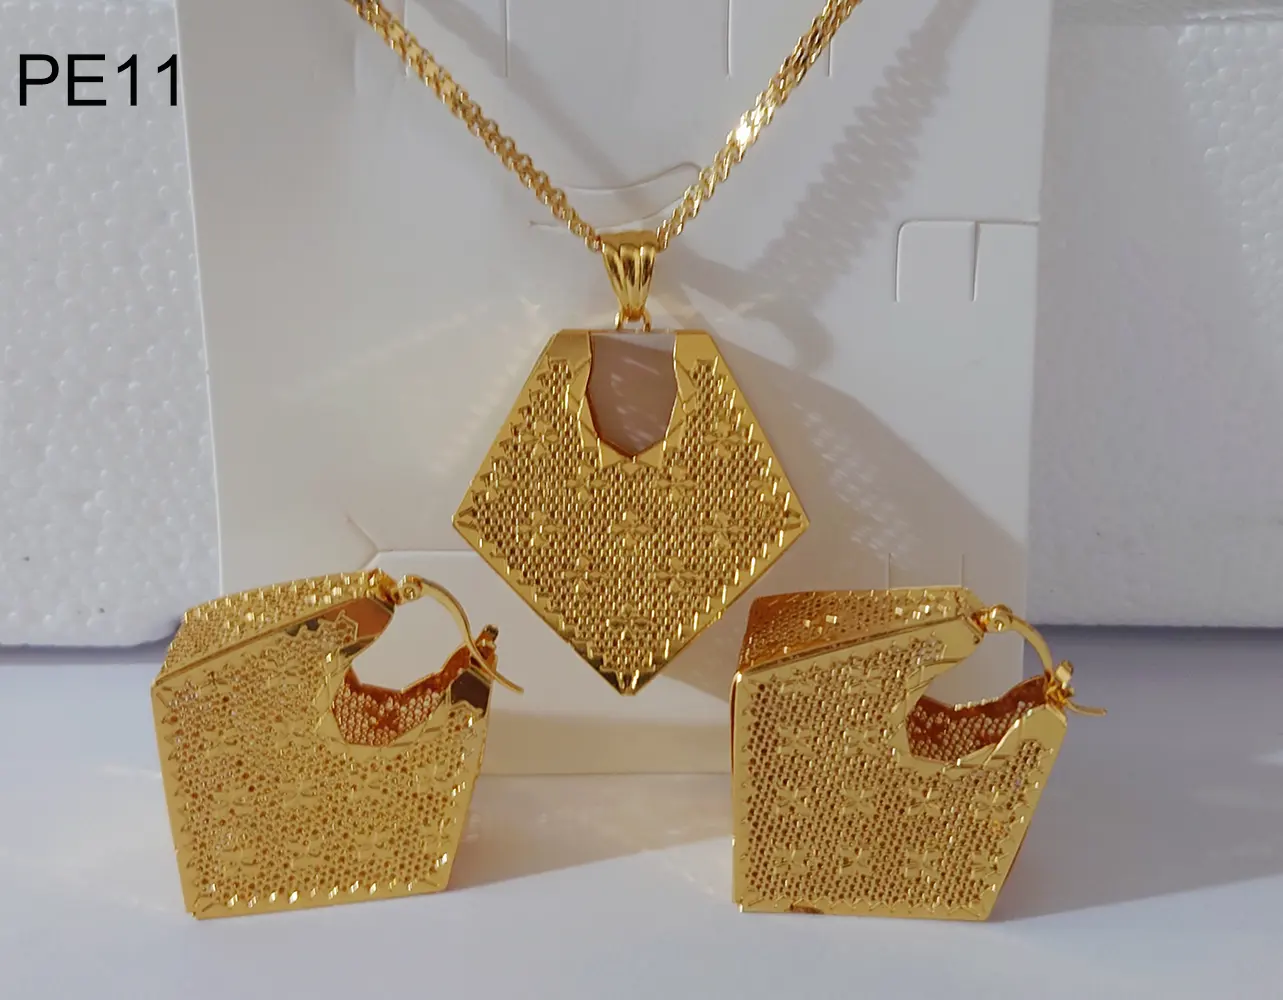 NEW Designs Flower Necklace Earrings Sets Dubai Gold Color 2 Pcs Jewelry Set Perdant African Costume Jewelry Wedding Party Gift